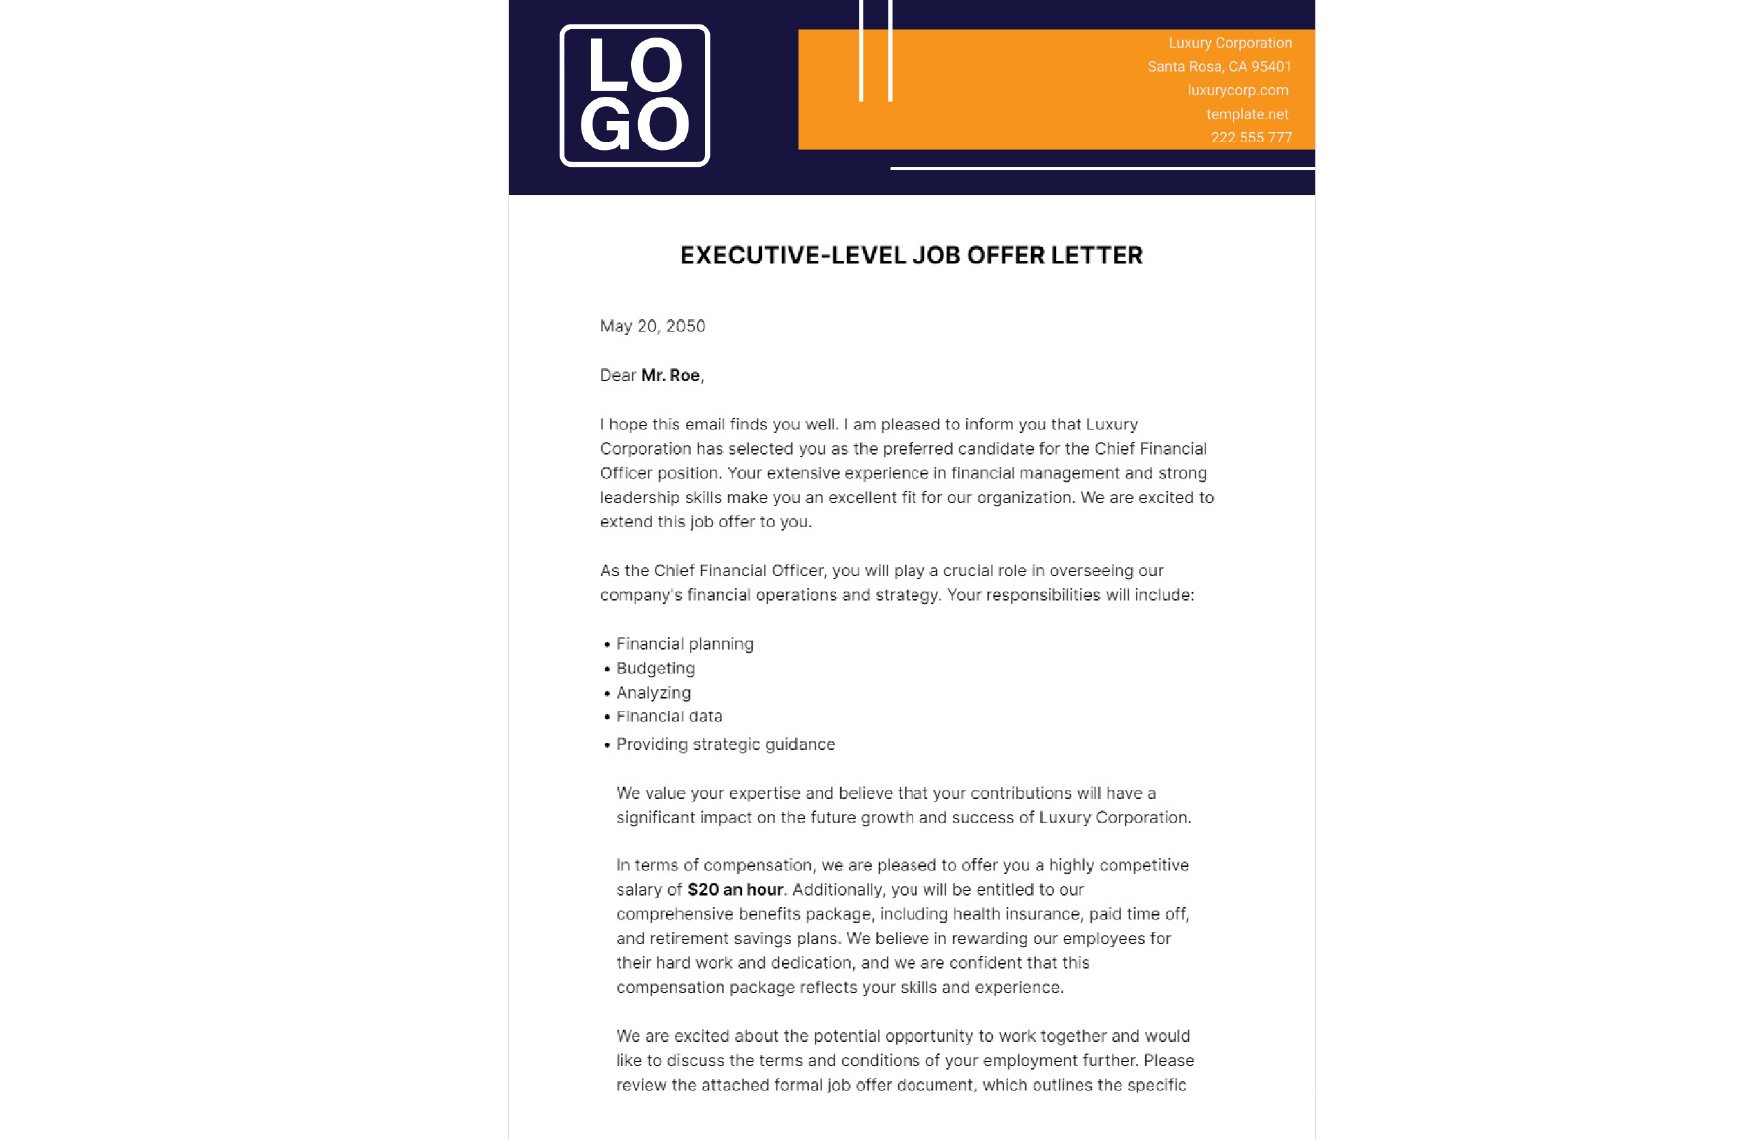 Executive-Level Job Offer Letter Template